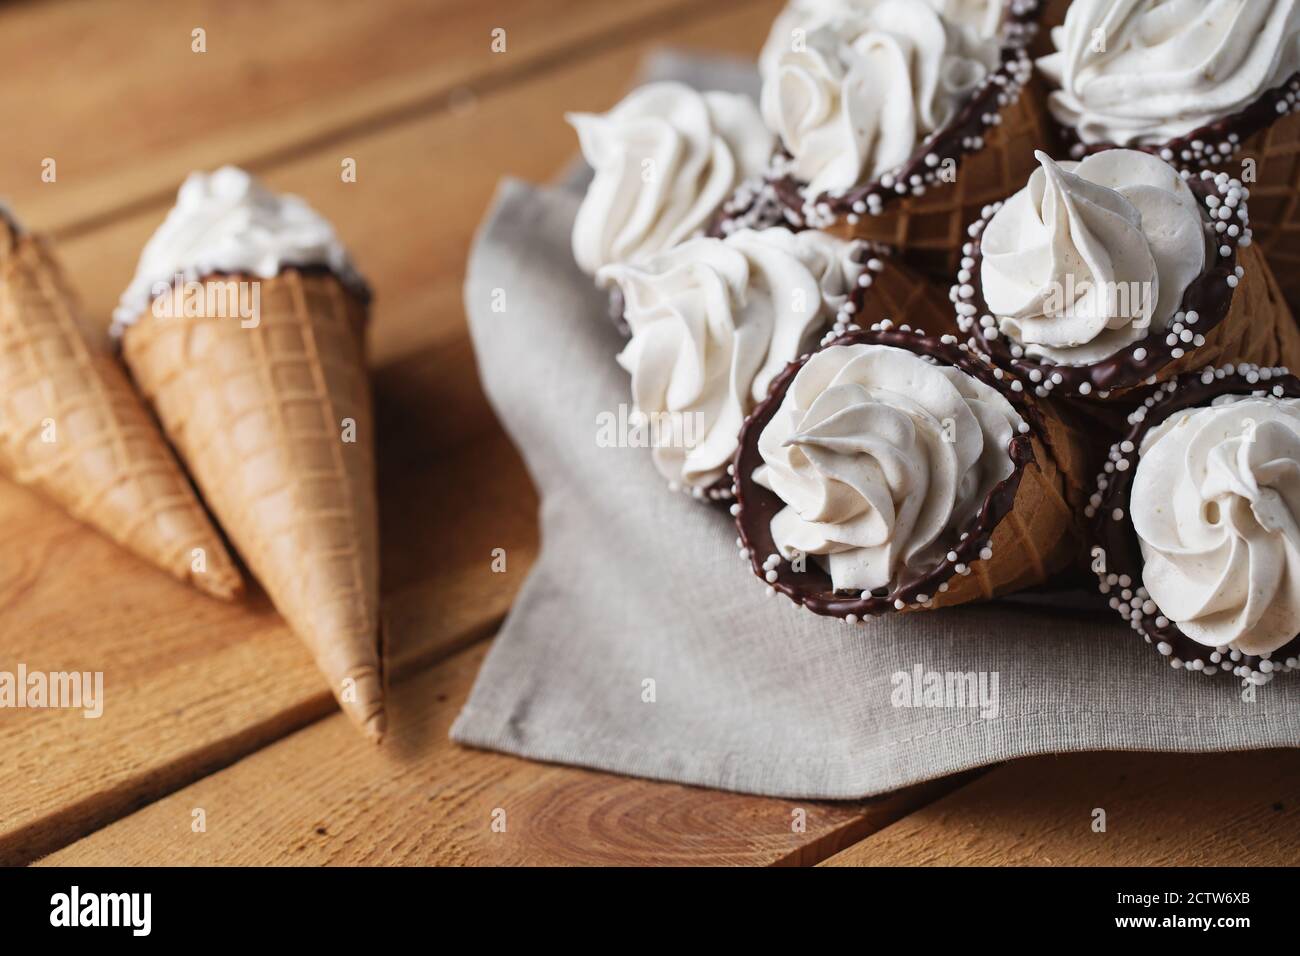 A lot of ice cream cones on wooden table. Soft ice creams or frozen custard in cones. Waffle marshmallow imitating ice cream Stock Photo